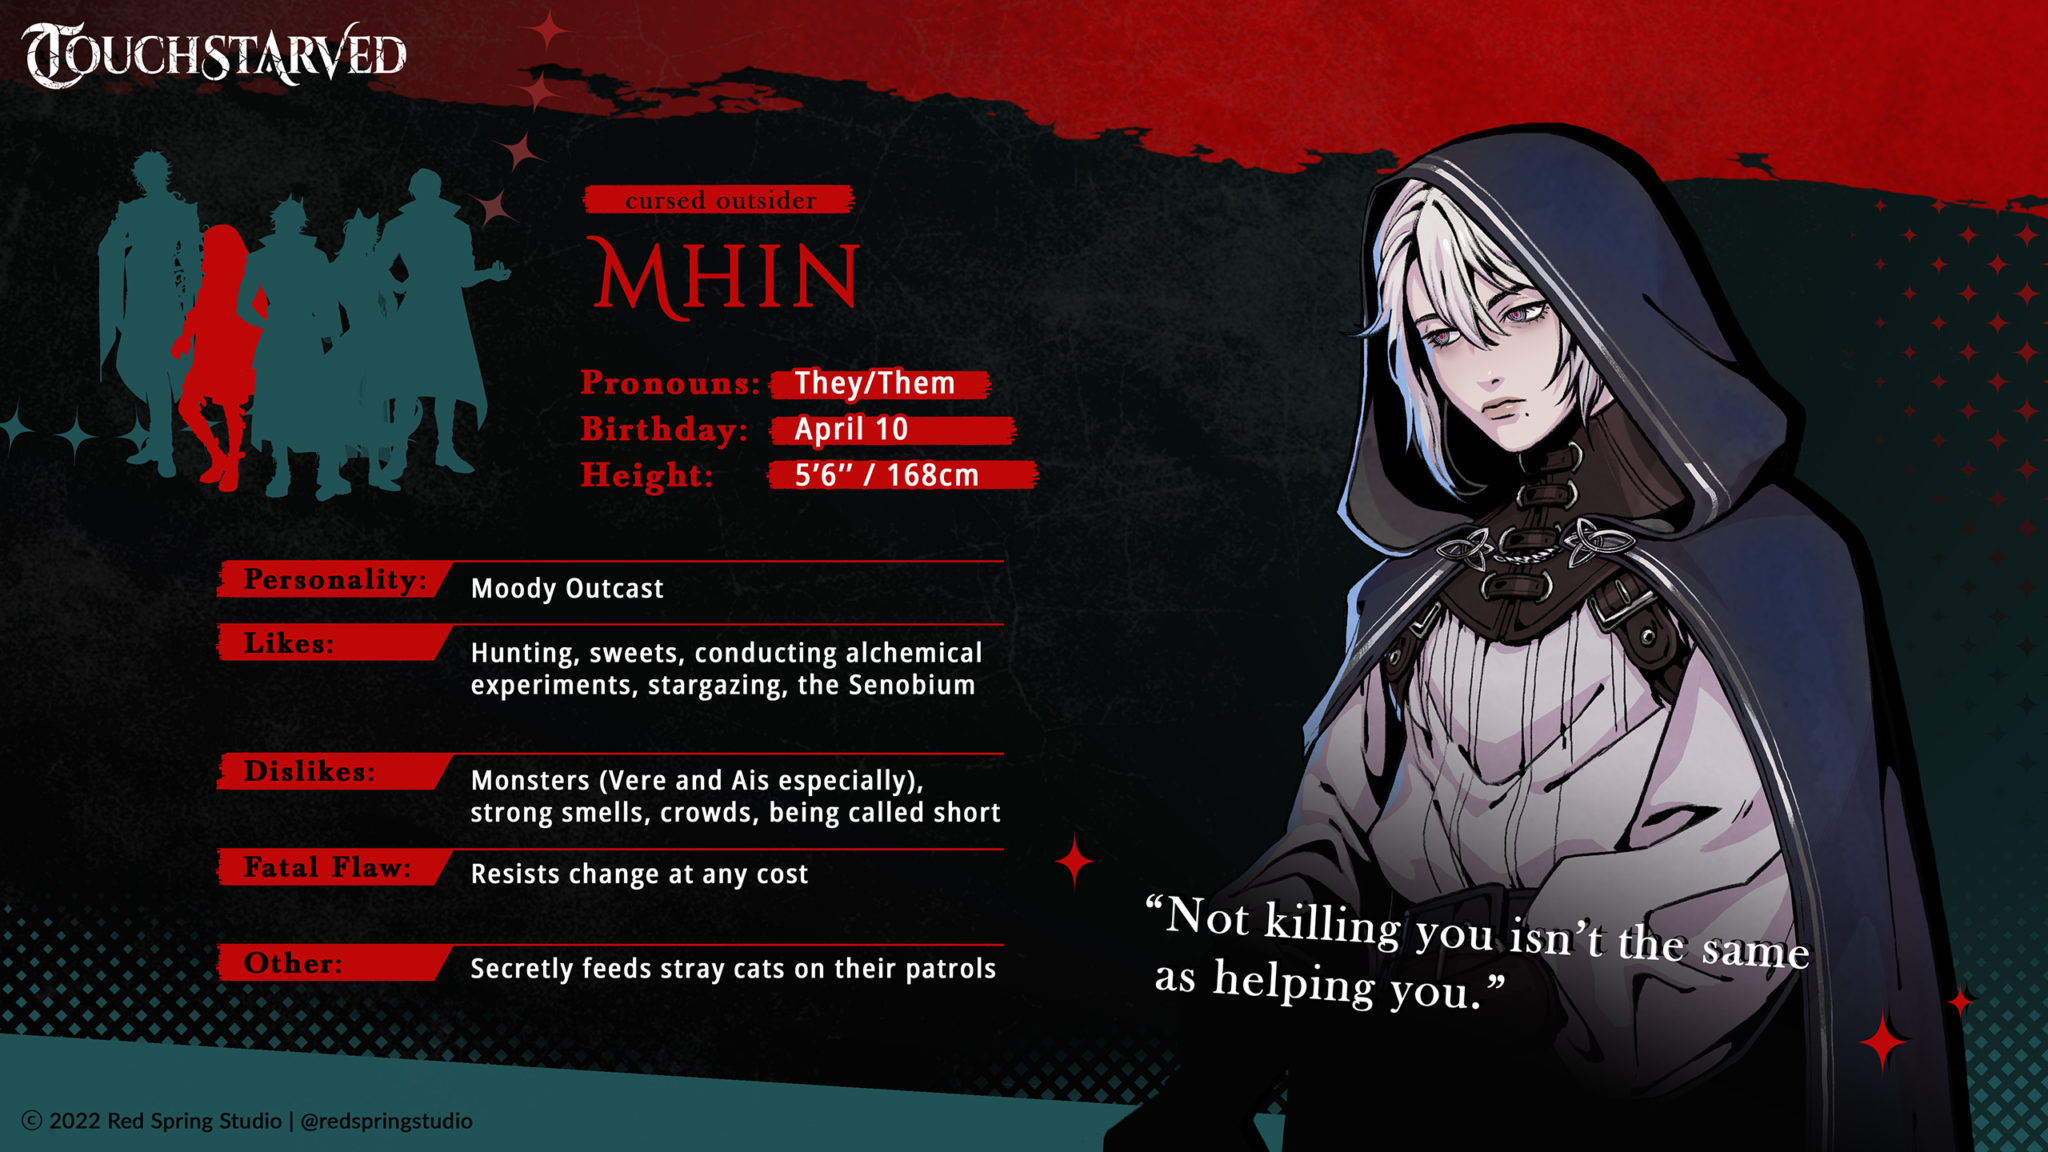 MHIN Pronouns: They/Them Birthday: April 10 Height (in + cm): 5’6’’ | 168cm Personality: Moody Outcast Likes: Hunting, sweets, conducting alchemical experiments, stargazing, the Senobium Dislikes: Monsters (Vere and Ais especially), strong smells, crowds, being called short Fatal Flaw: Resists change at any cost Extra: Secretly feeds stray cats on their patrols Quote: “Not killing you isn’t the same as helping you.”